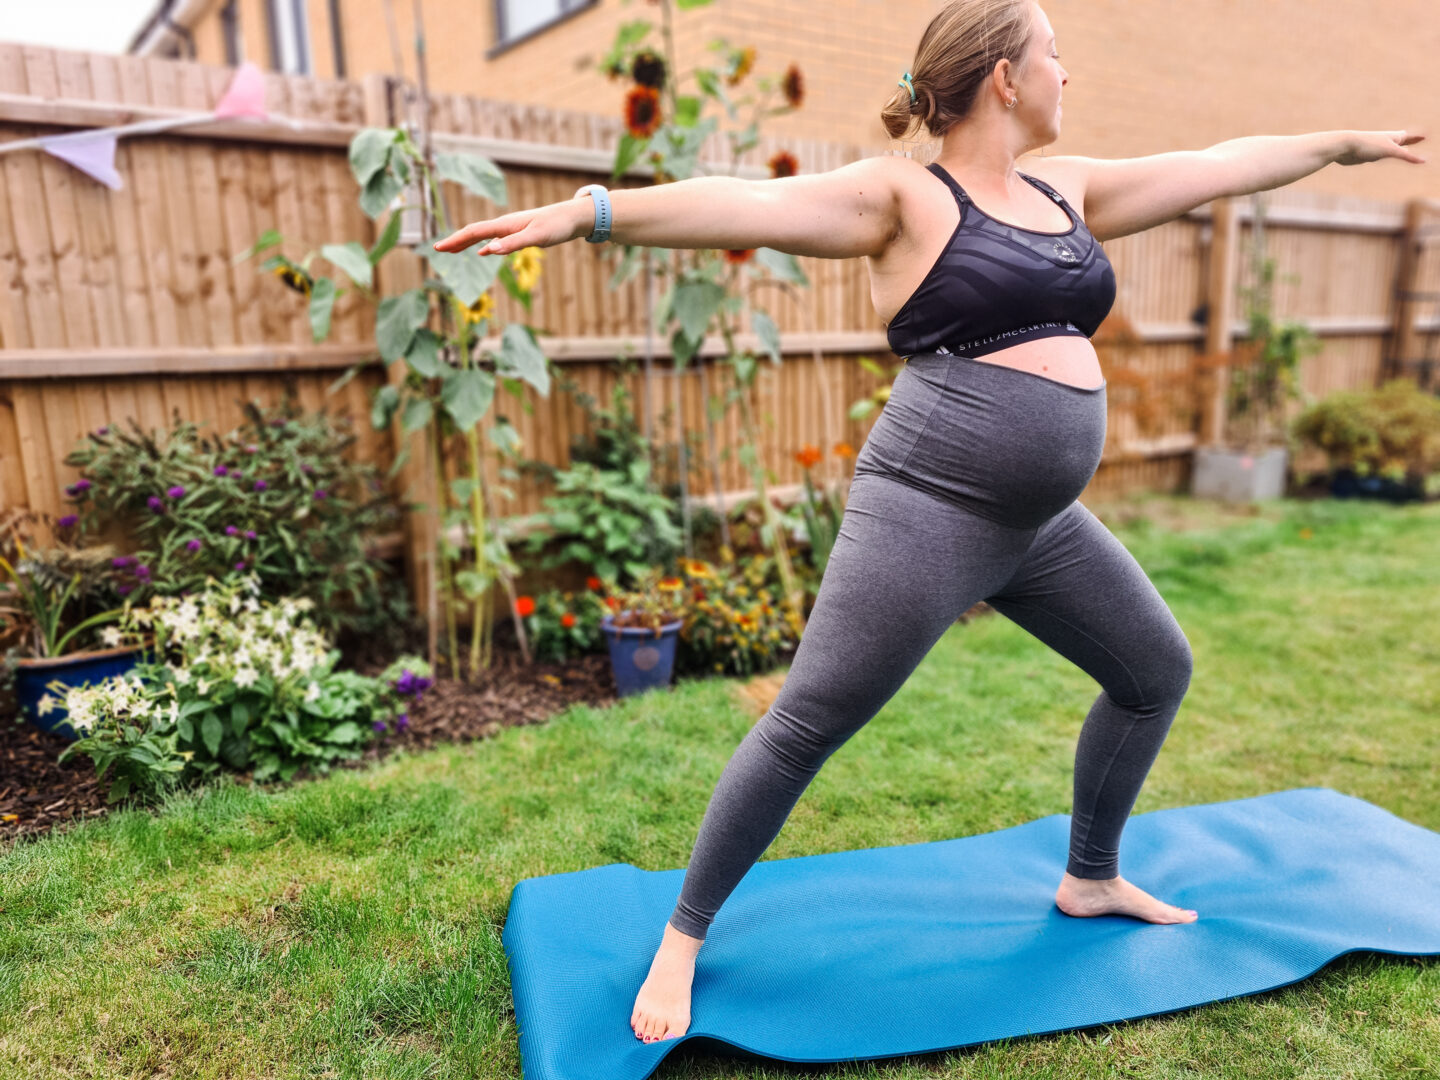 Pregnant woman wearing grey leggings and black sports bra is standing on a yoga mat doing Warrior pose. Behind her is blurred background of grass and plants